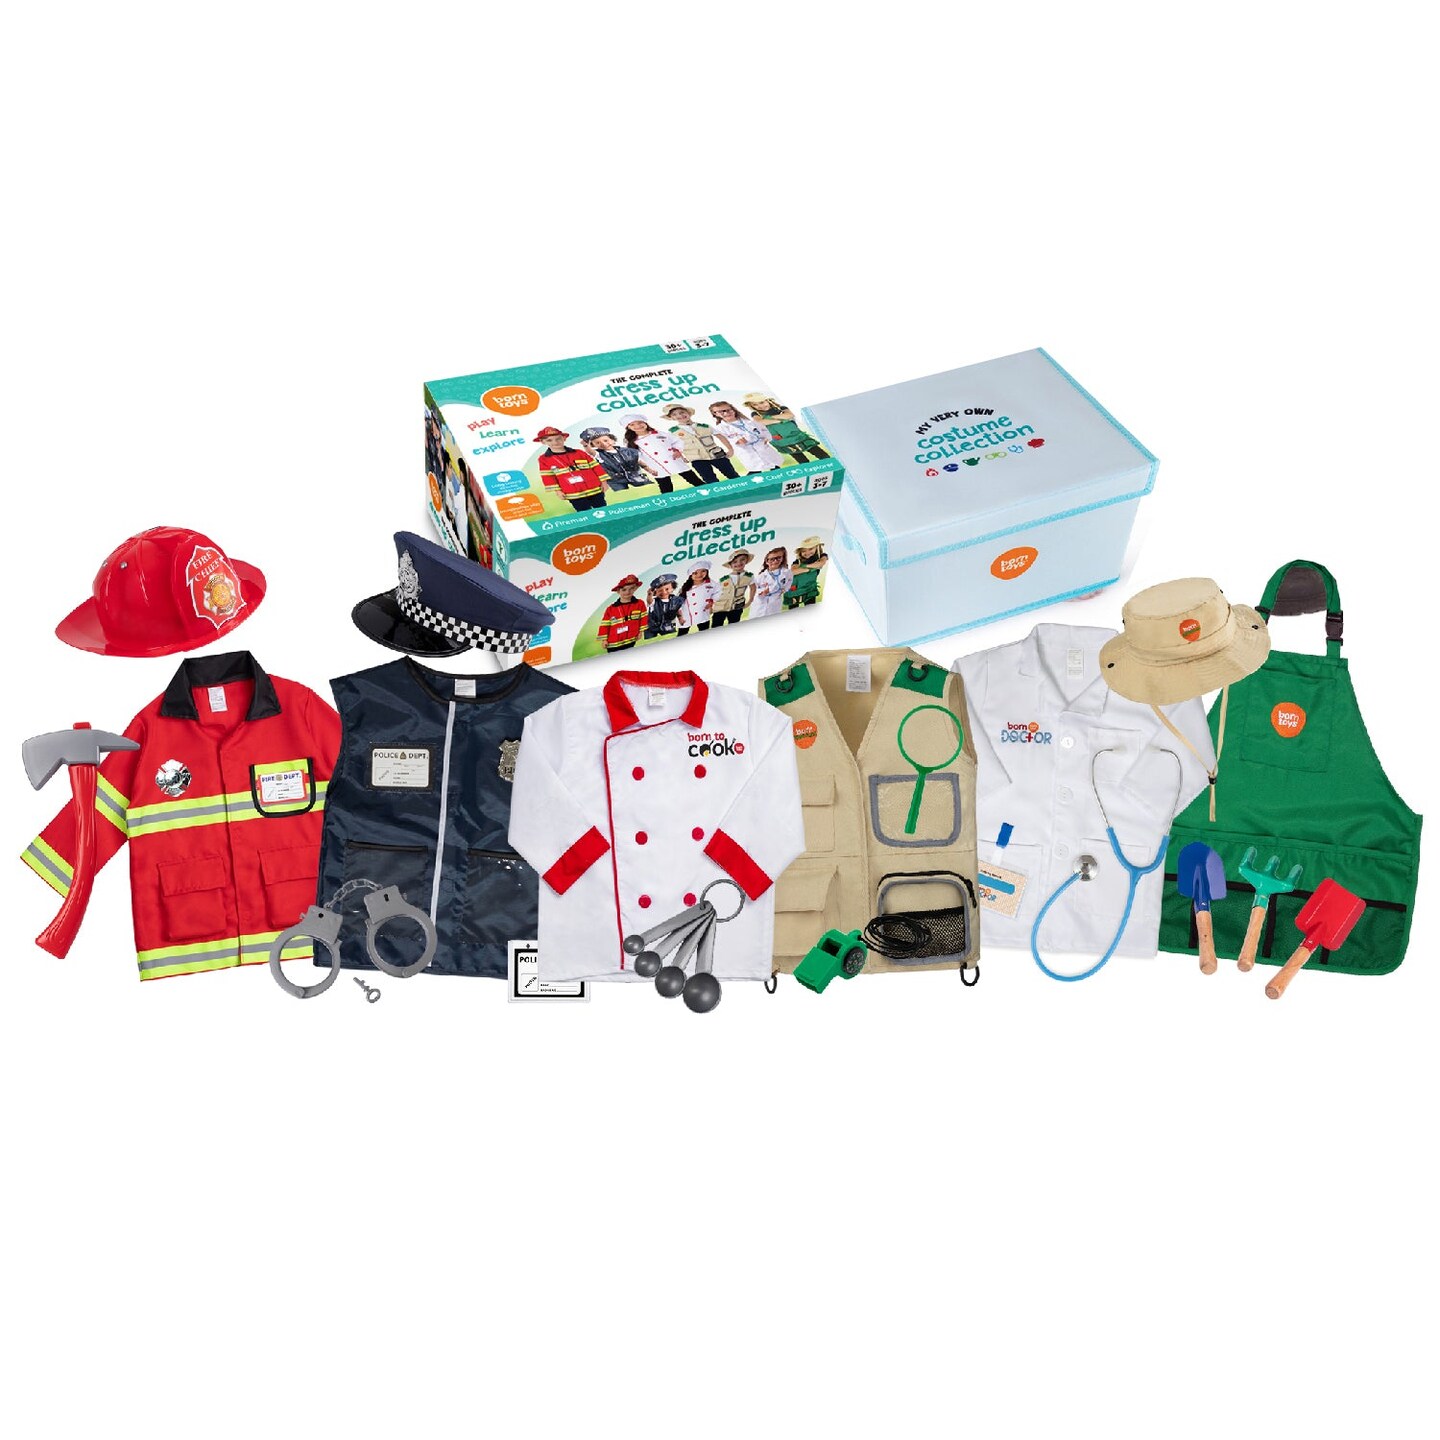 Dress Up / Drama Play Deluxe Trunk 6 In 1 Set